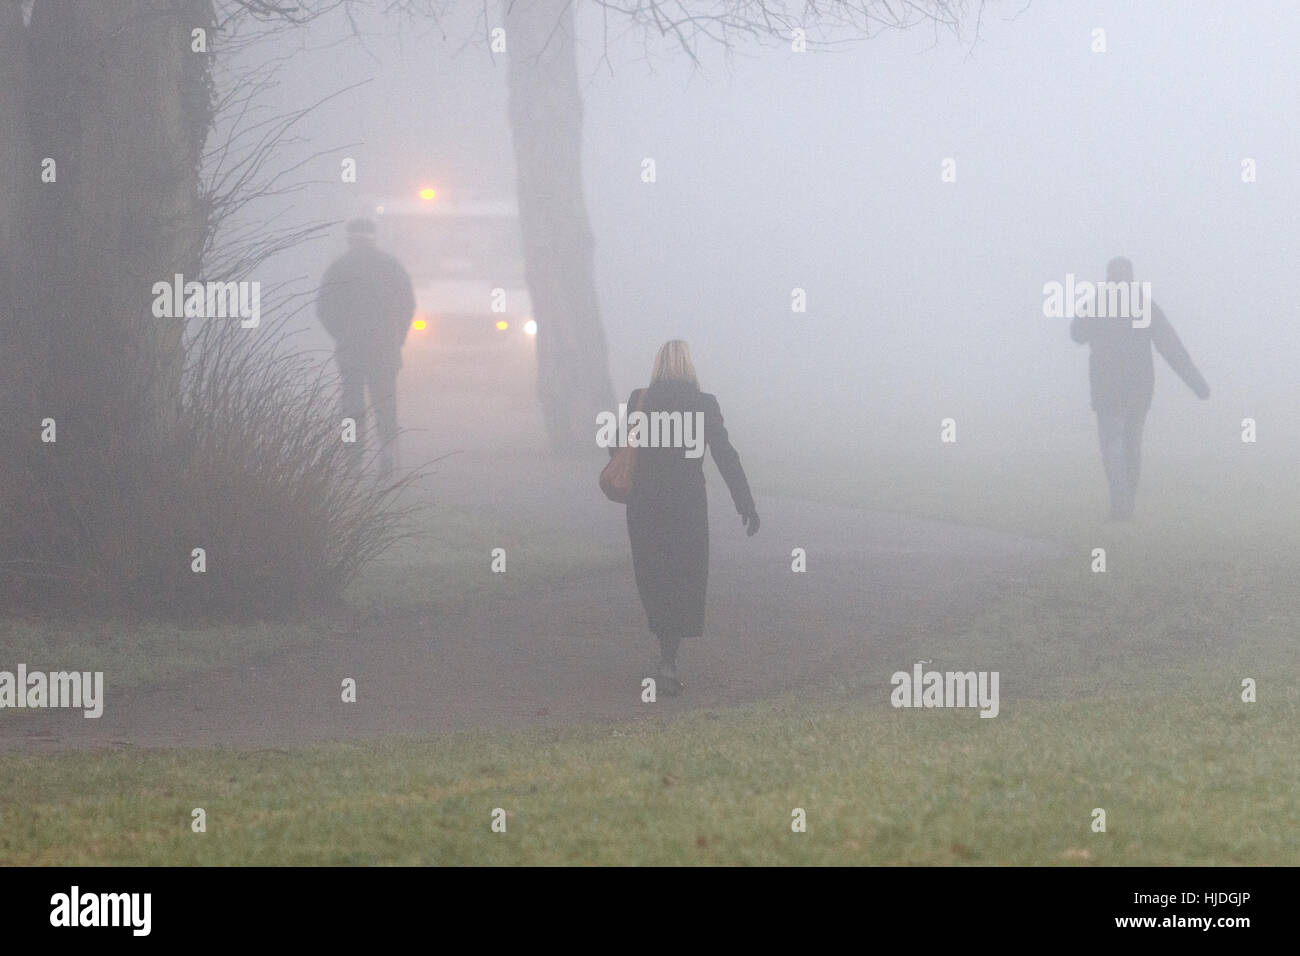 Chippenham, UK. 25th Jan, 2017. As foggy weather continues to affect many parts of the UK, people are pictured walking in a park in Chippenham, Wiltshire. Credit: lynchpics/Alamy Live News Stock Photo